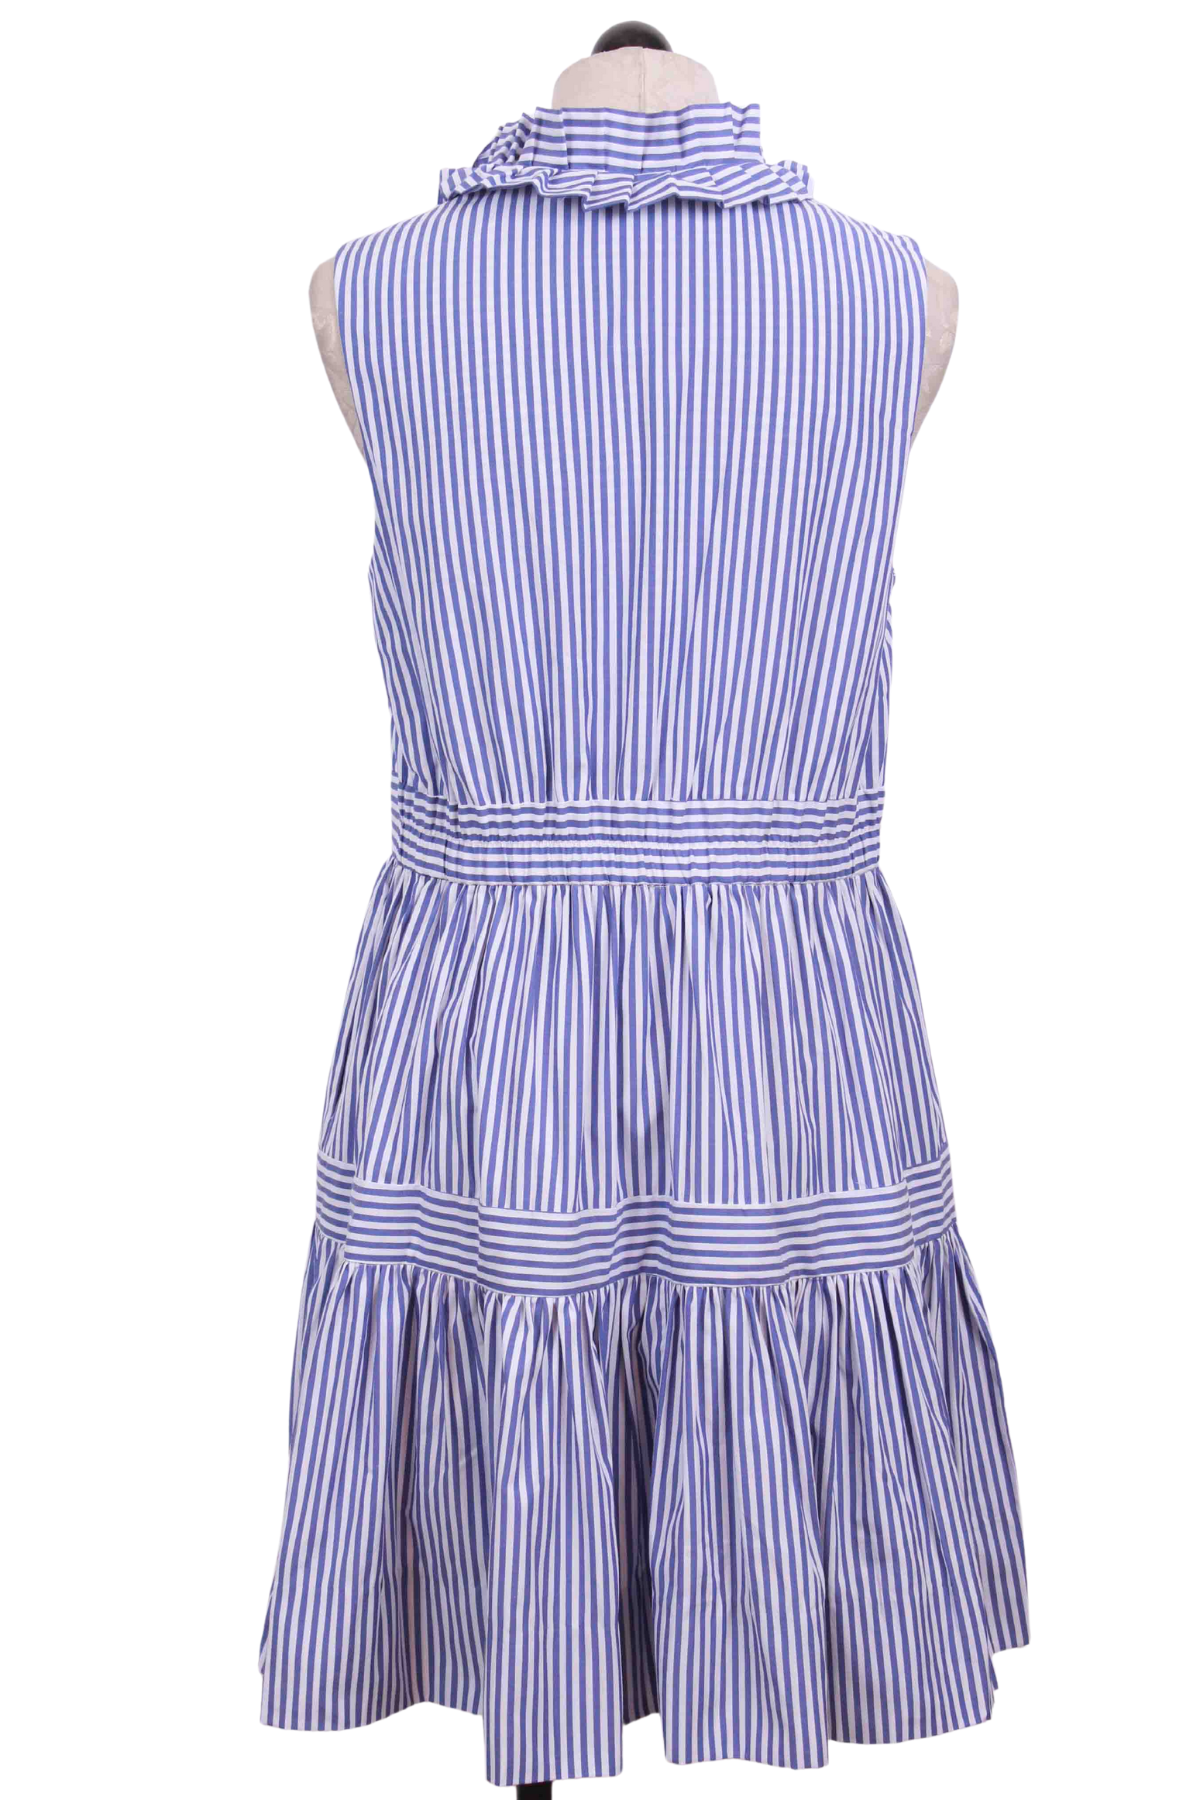 back view of  Navy and White Striped Short Hope Dress by Gretchen Scott